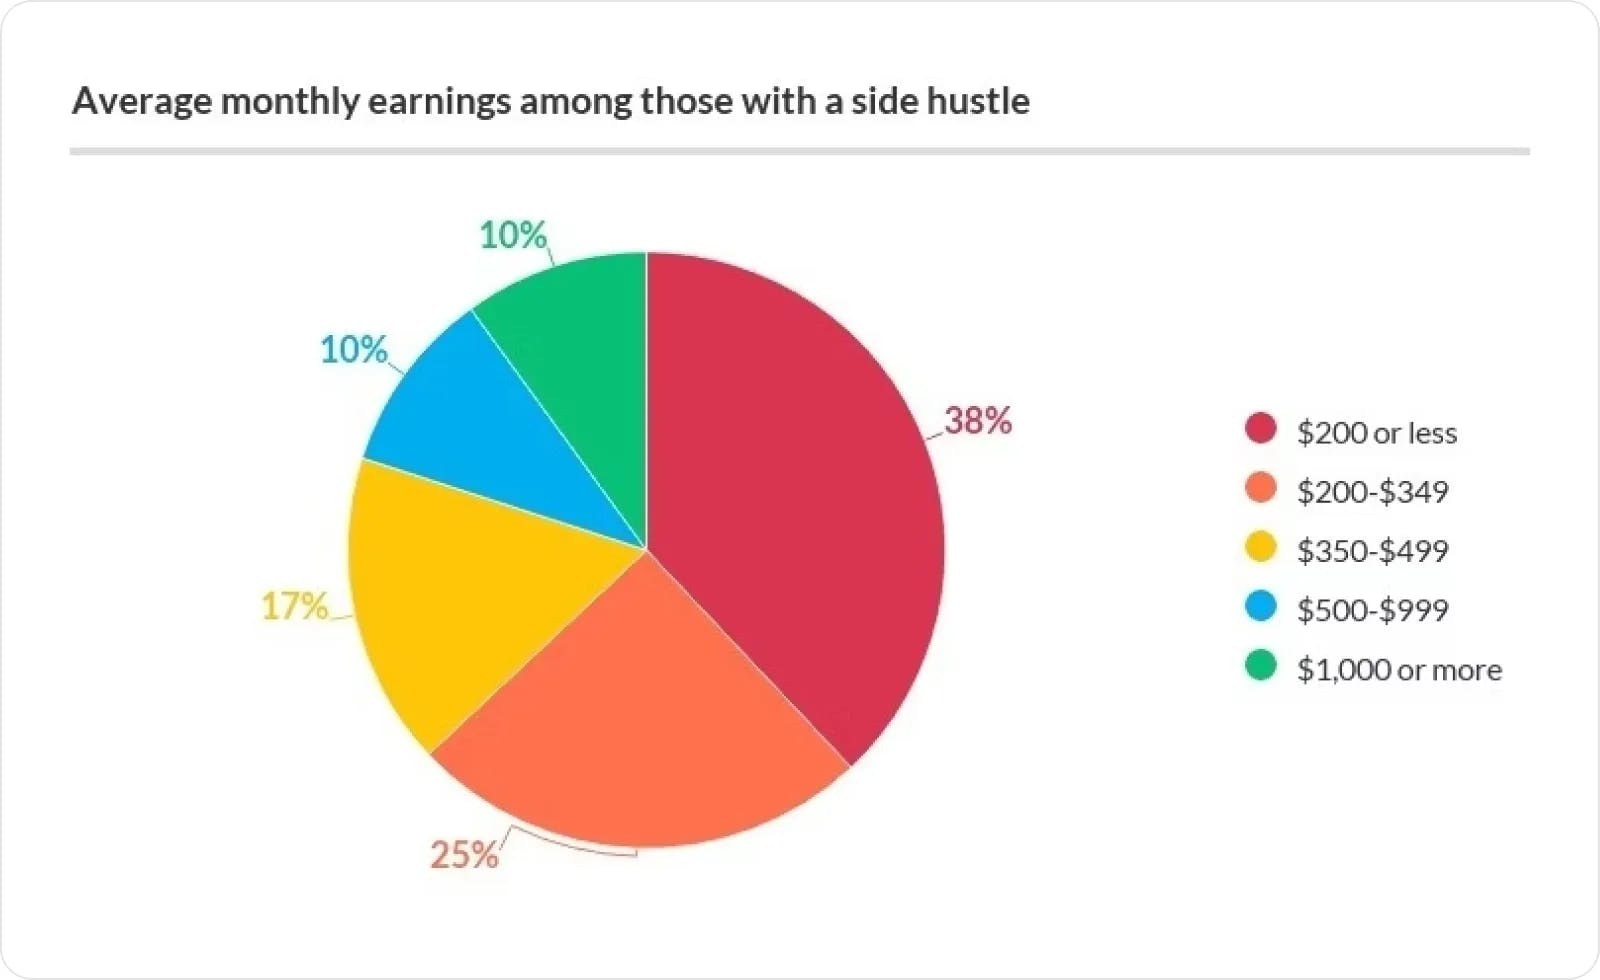 Average monthly earnings among those with a side hustle